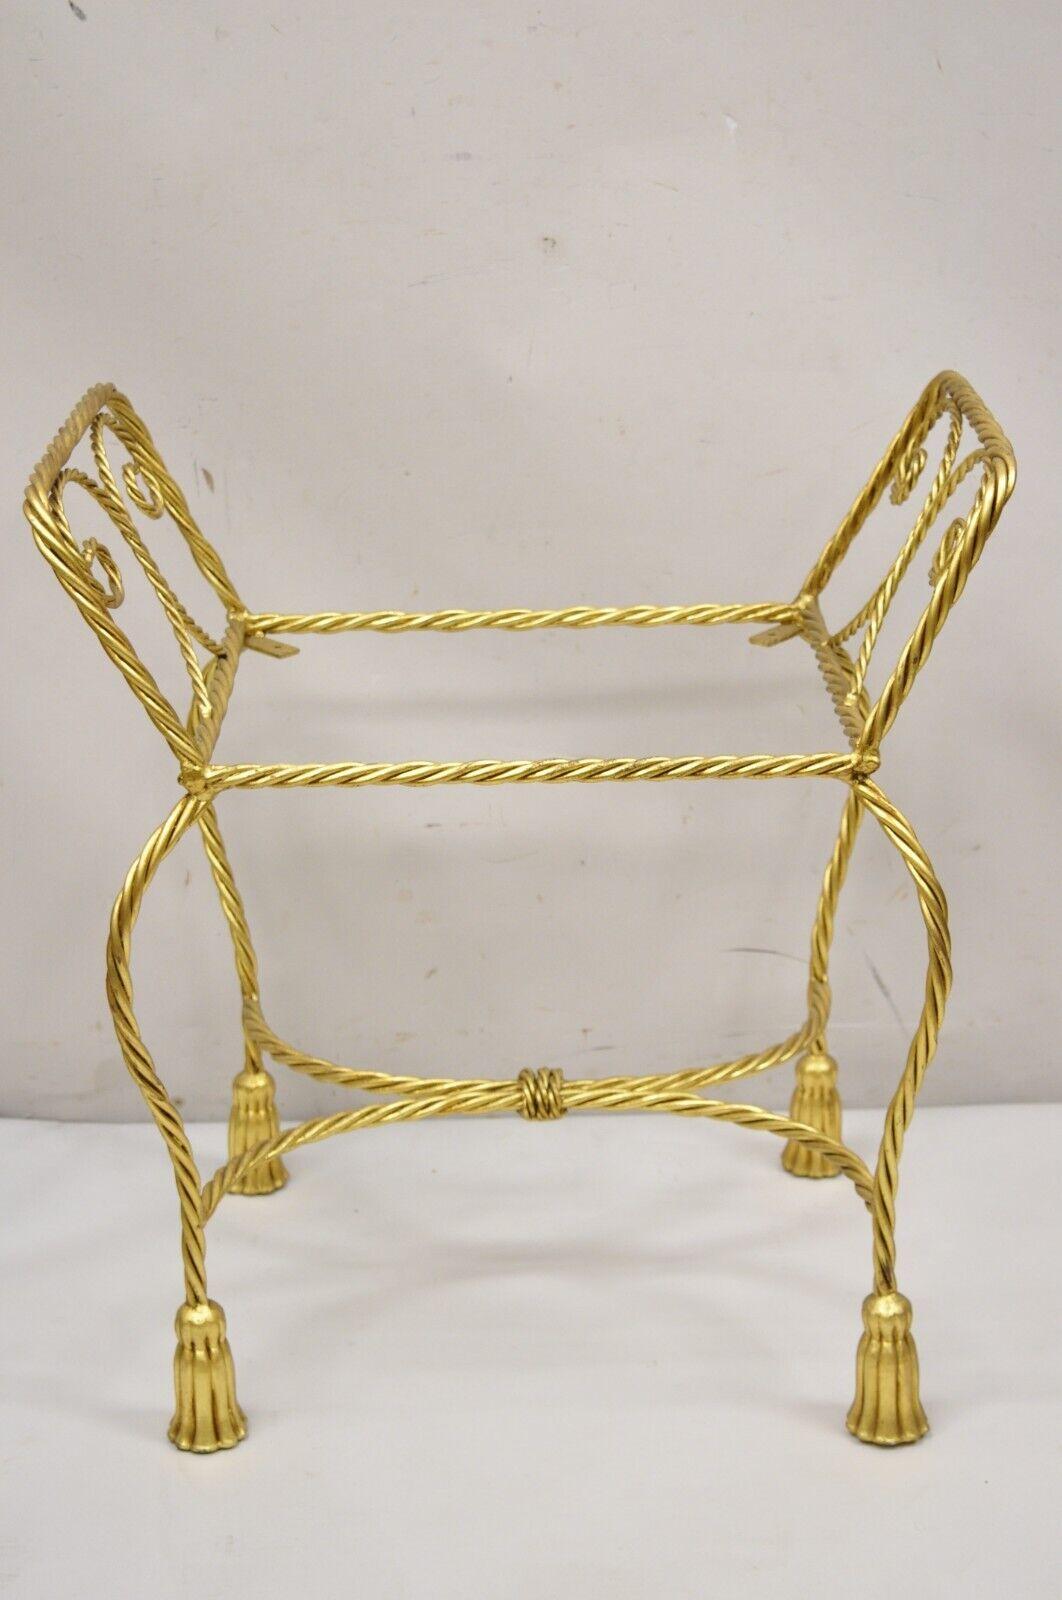 Vintage Italian Hollywood Regency Gold Gilt Iron Rope Tassel Form Vanity Bench Chair Seat. Item features tassel form feet, iron metal scrolling rope frame, gold leaf gilt finish, quality Italian craftsmanship, great style and form, does not include